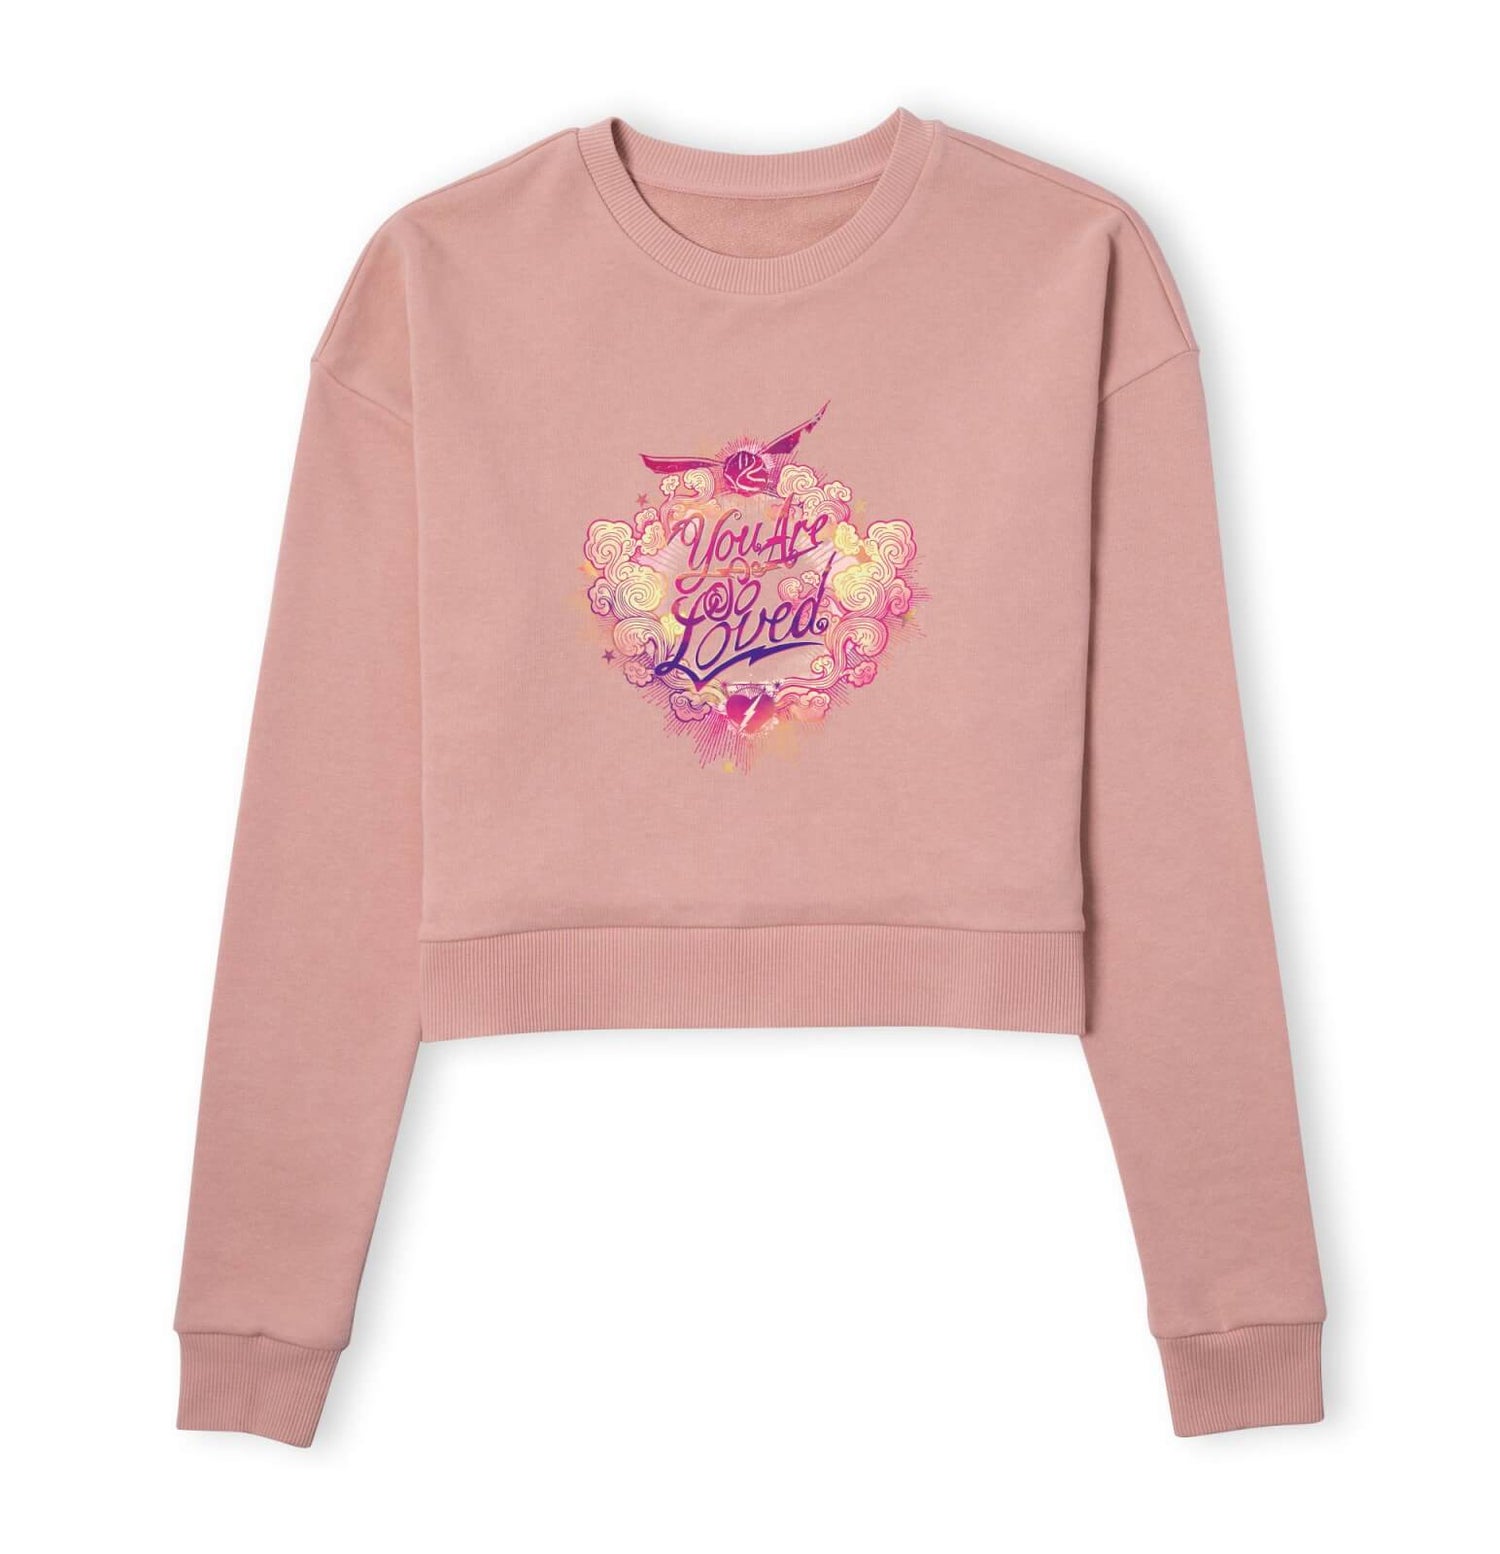 Harry Potter You Are So Loved Women's Cropped Sweatshirt - Dusty Pink